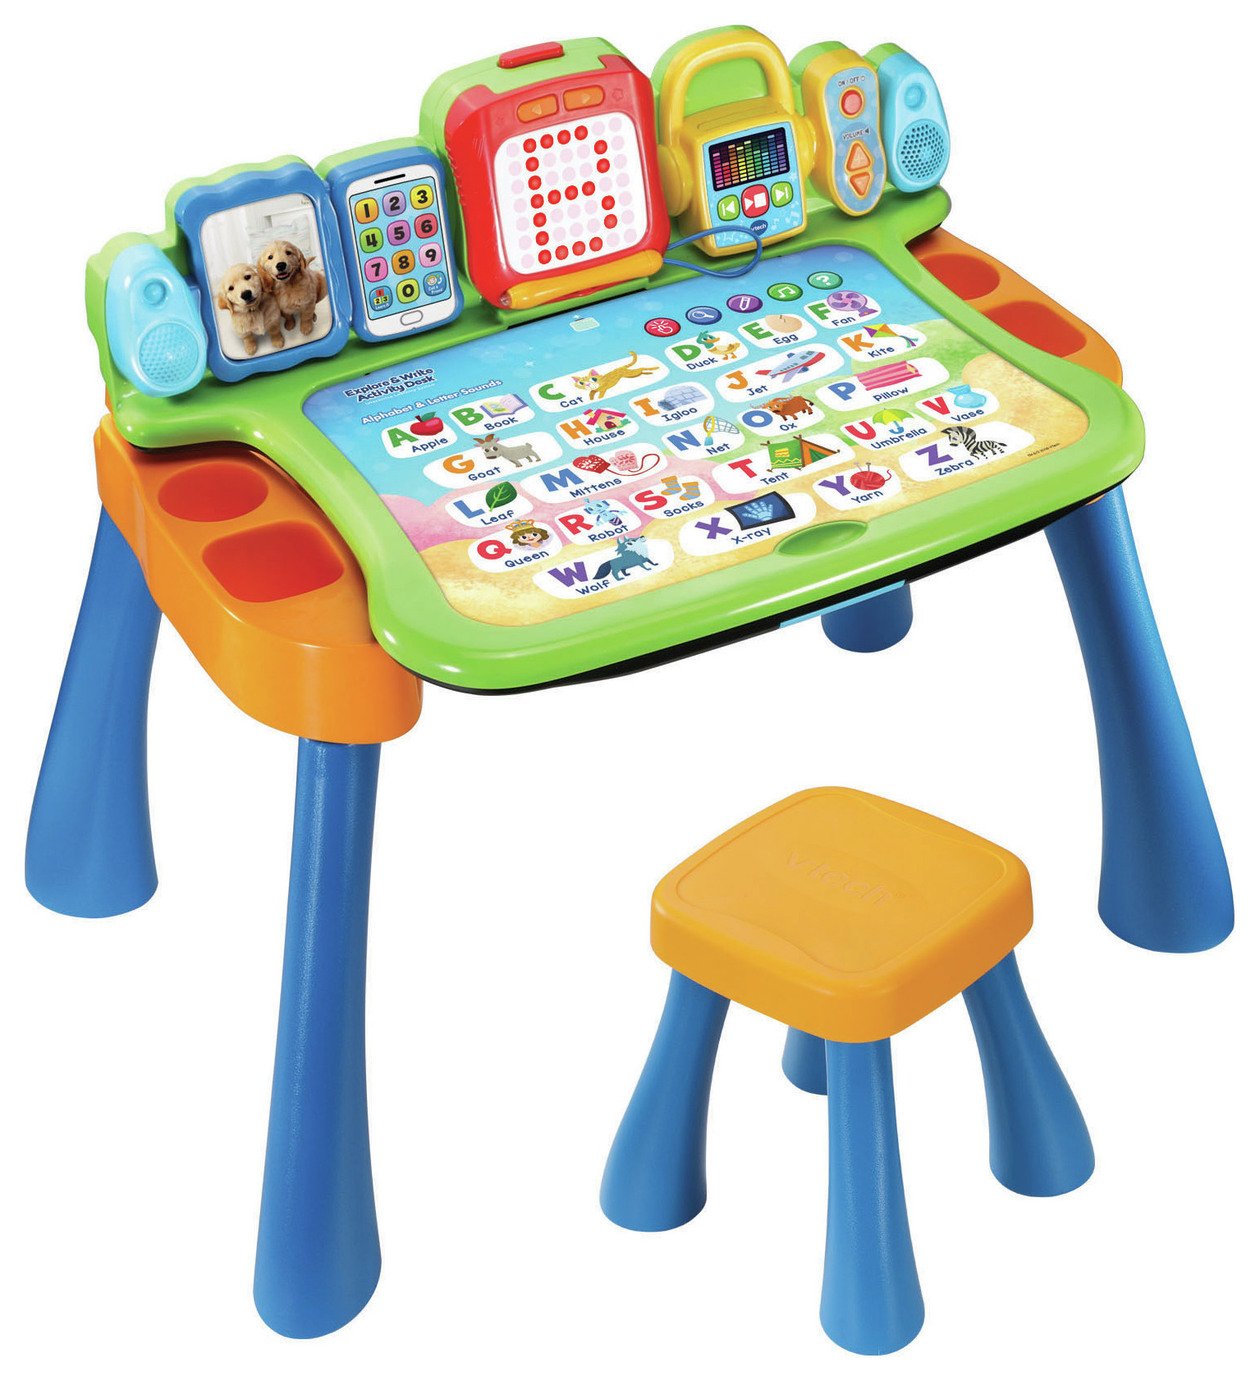 VTech Touch & Learn Activity Desk Review